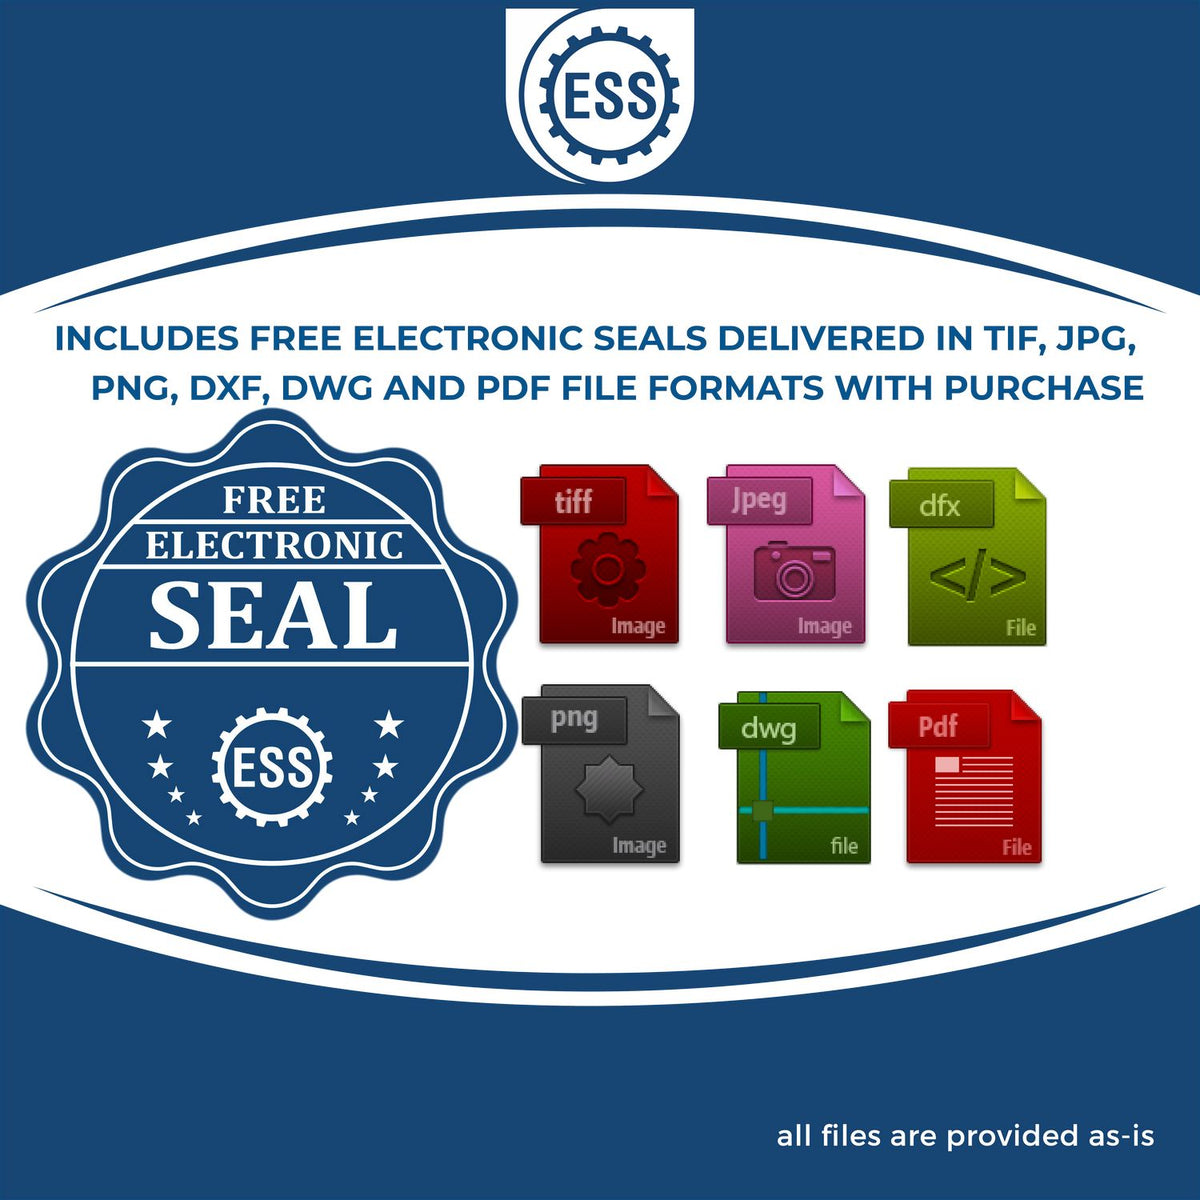 An infographic for the free electronic seal for the Self-Inking Virginia Geologist Stamp illustrating the different file type icons such as DXF, DWG, TIF, JPG and PNG.